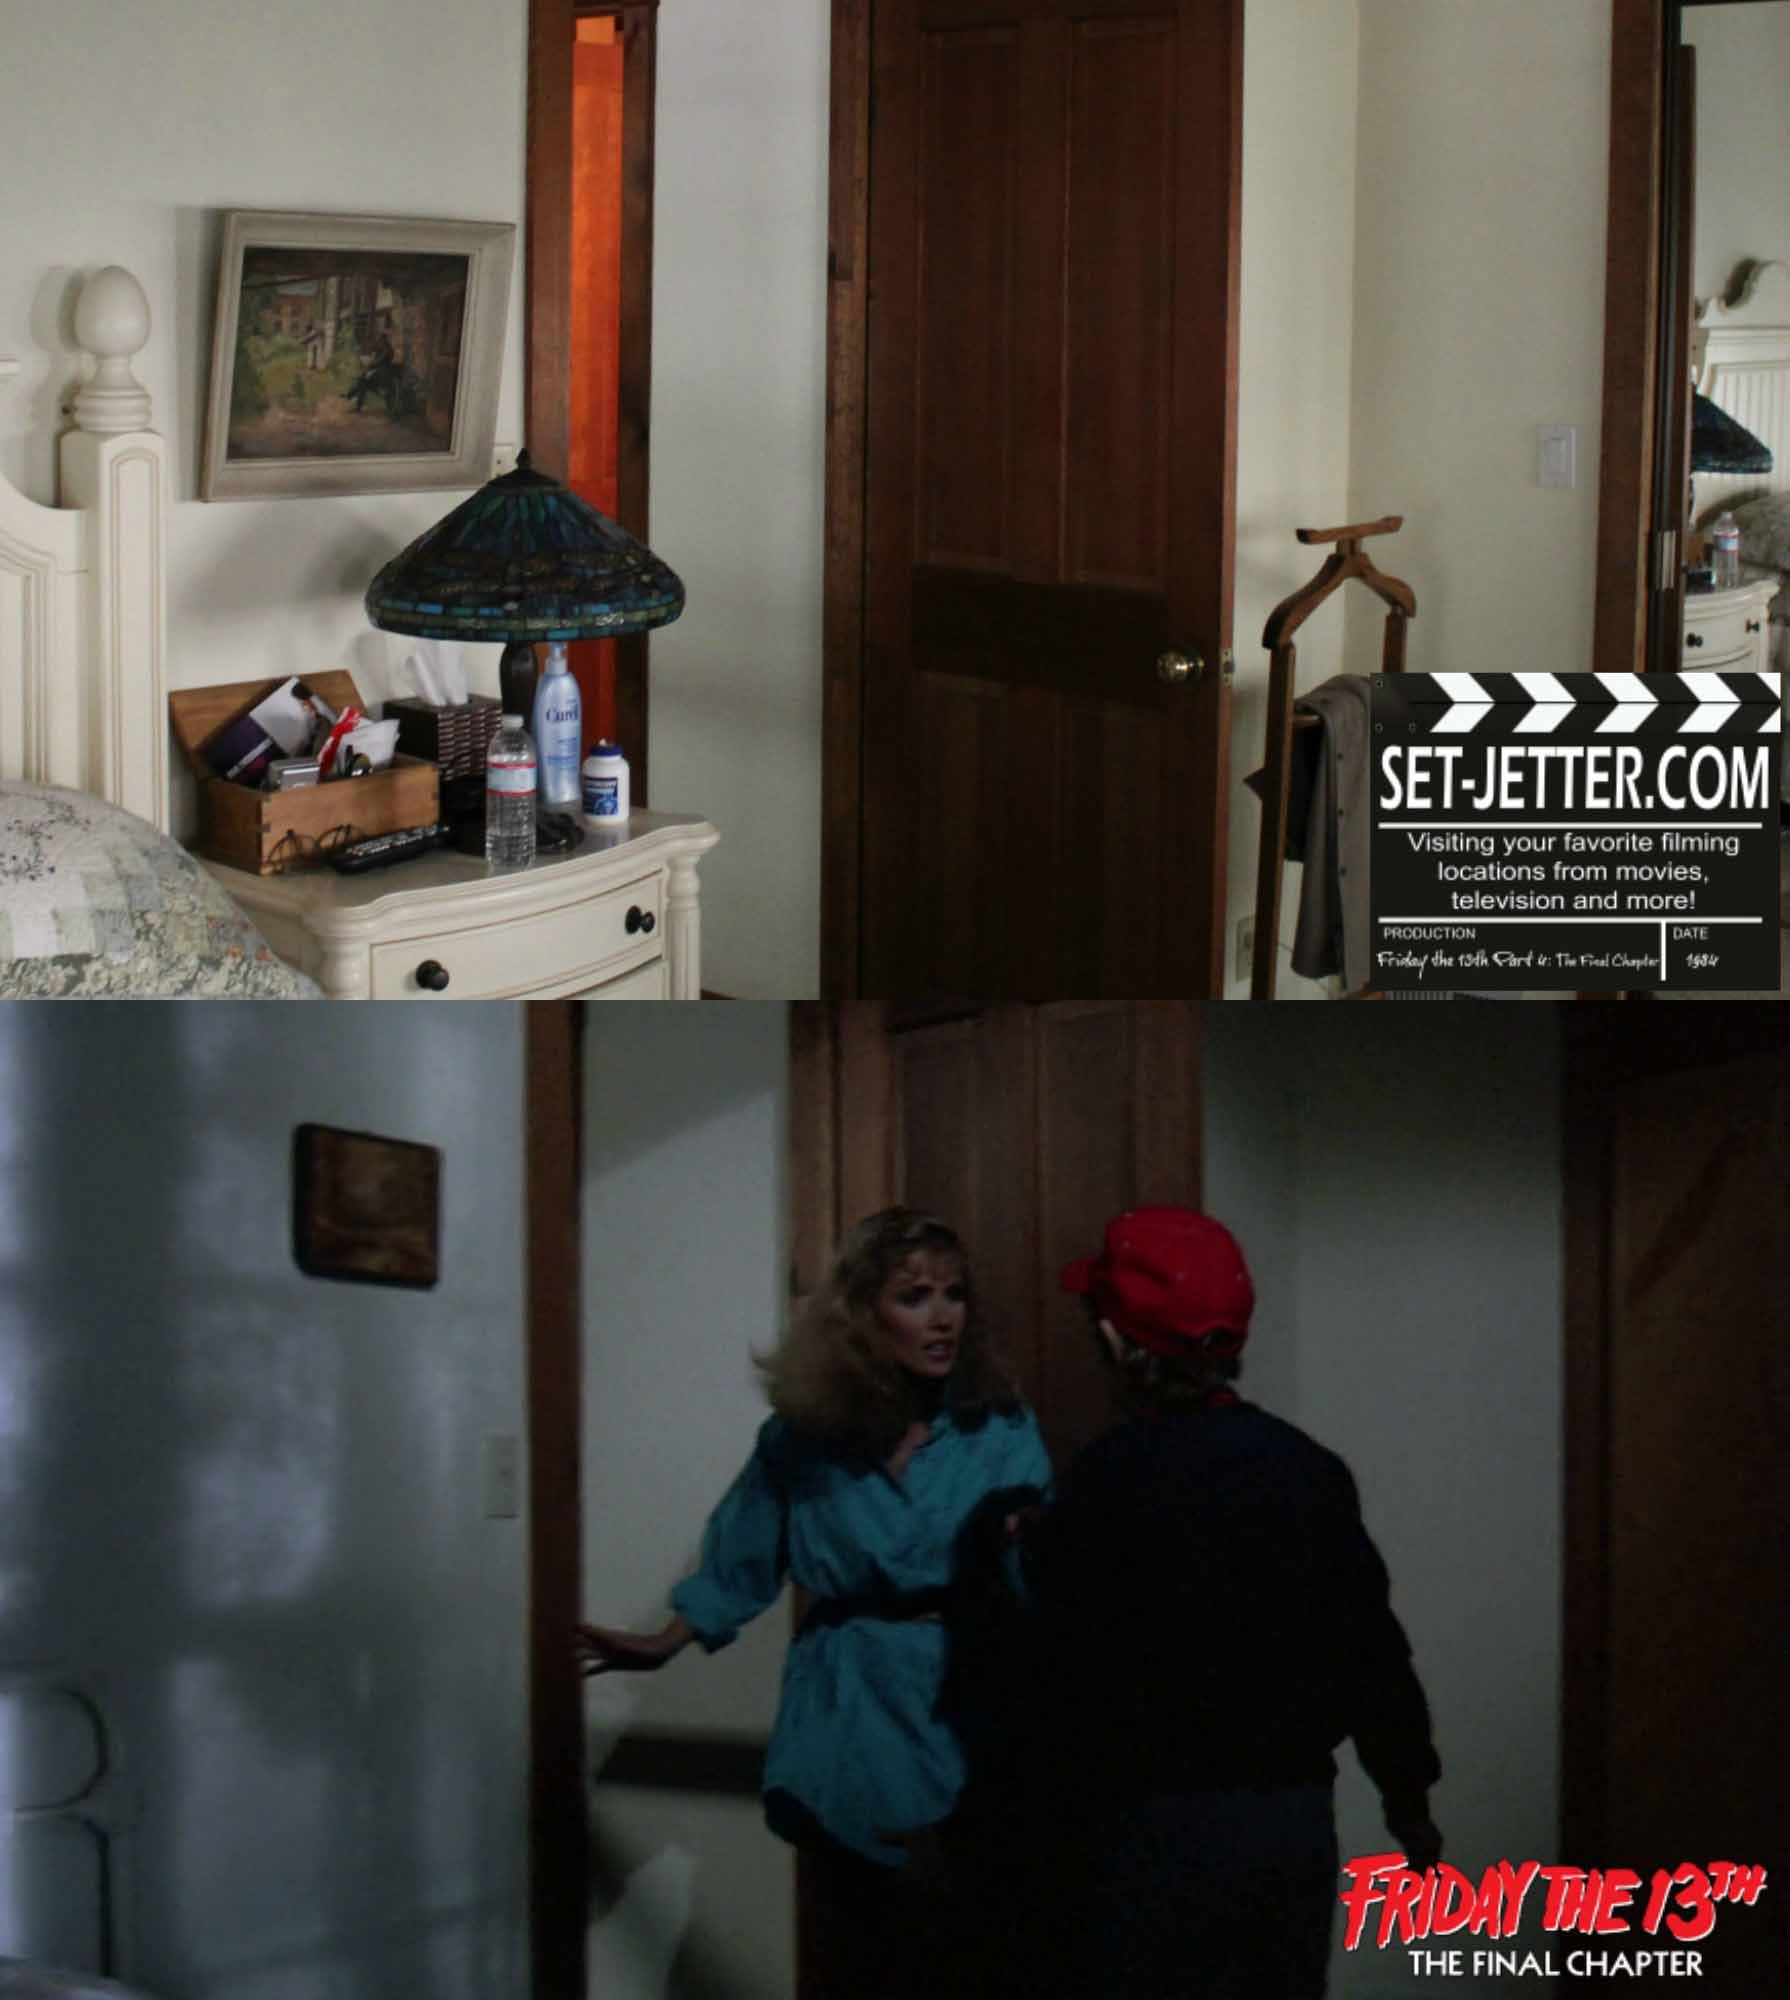 Friday the 13th The Final Chapter comparison 138.jpg